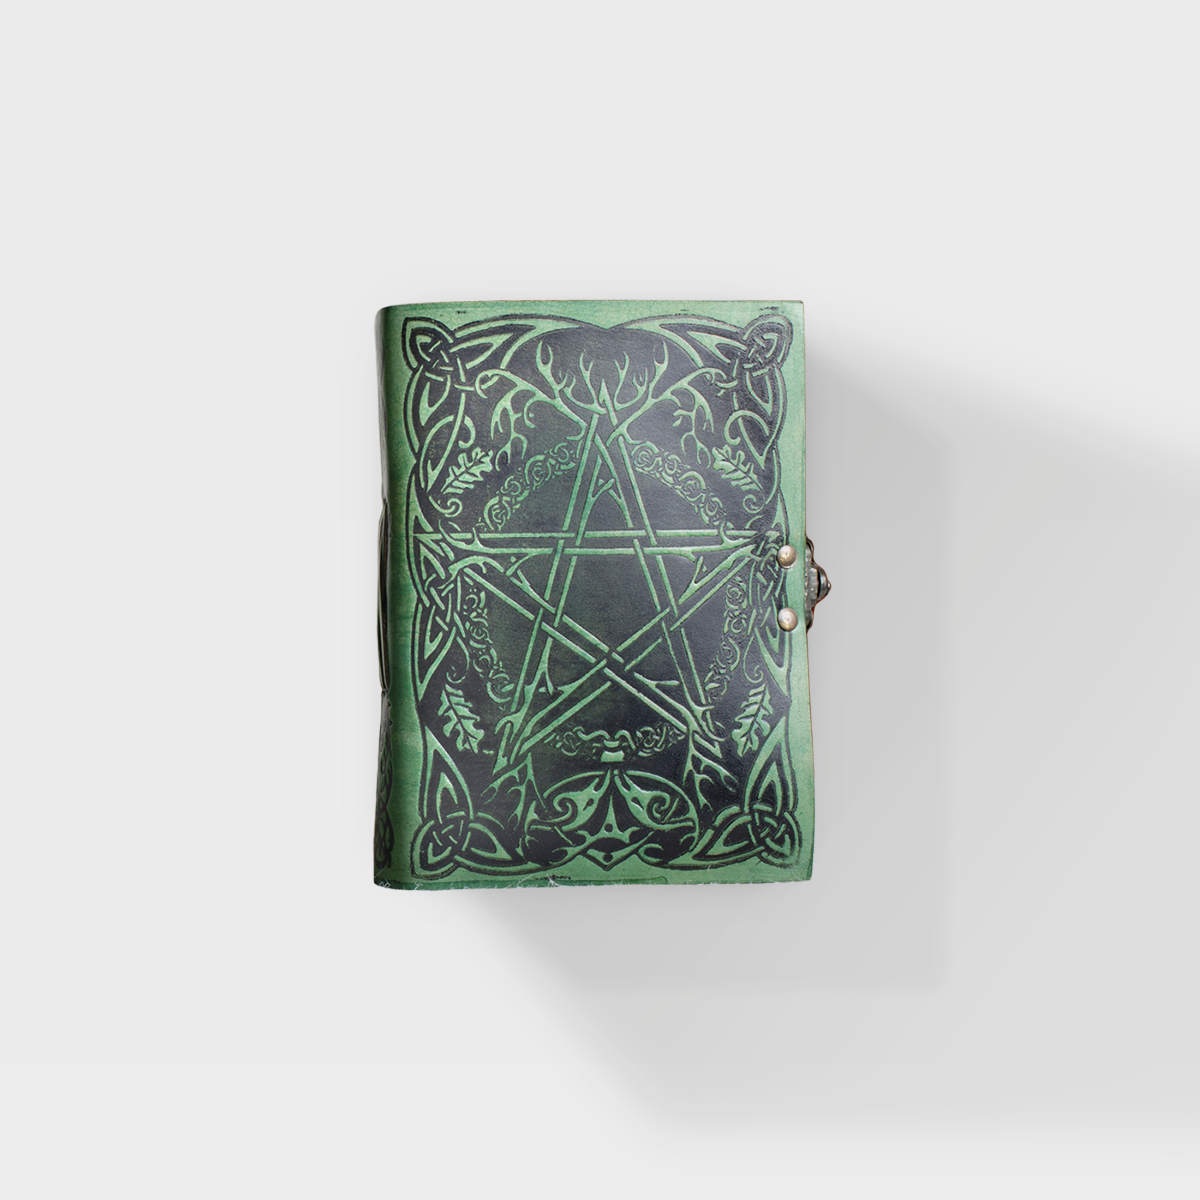 Earth Pentacle - Jen Delyth - 5x7 - Green Leather Journal